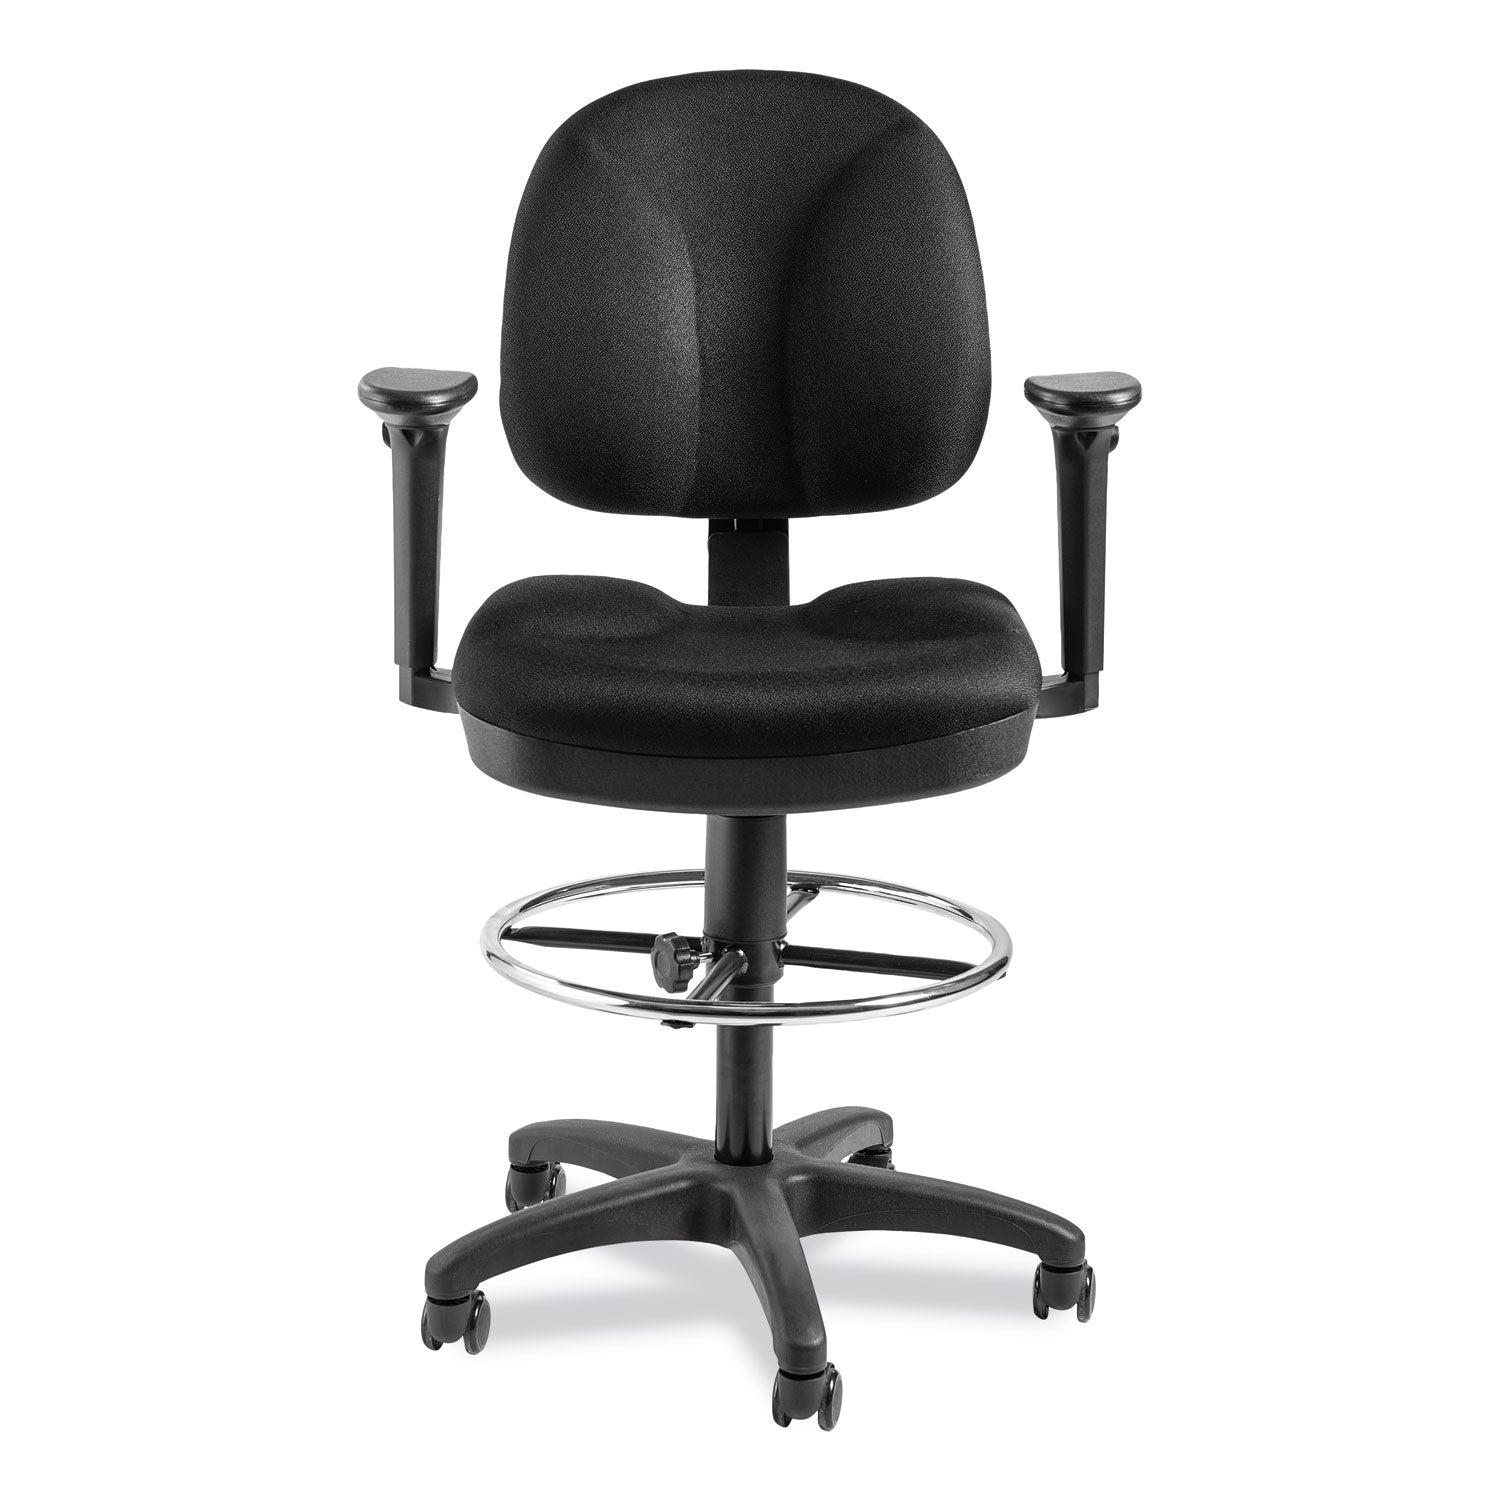 comfort-task-stool-with-arms-supports-up-to-300-lb-255-to-355-seat-height-black-seat-back-base-ships-in-1-3-bus-days_npsctsa - 2